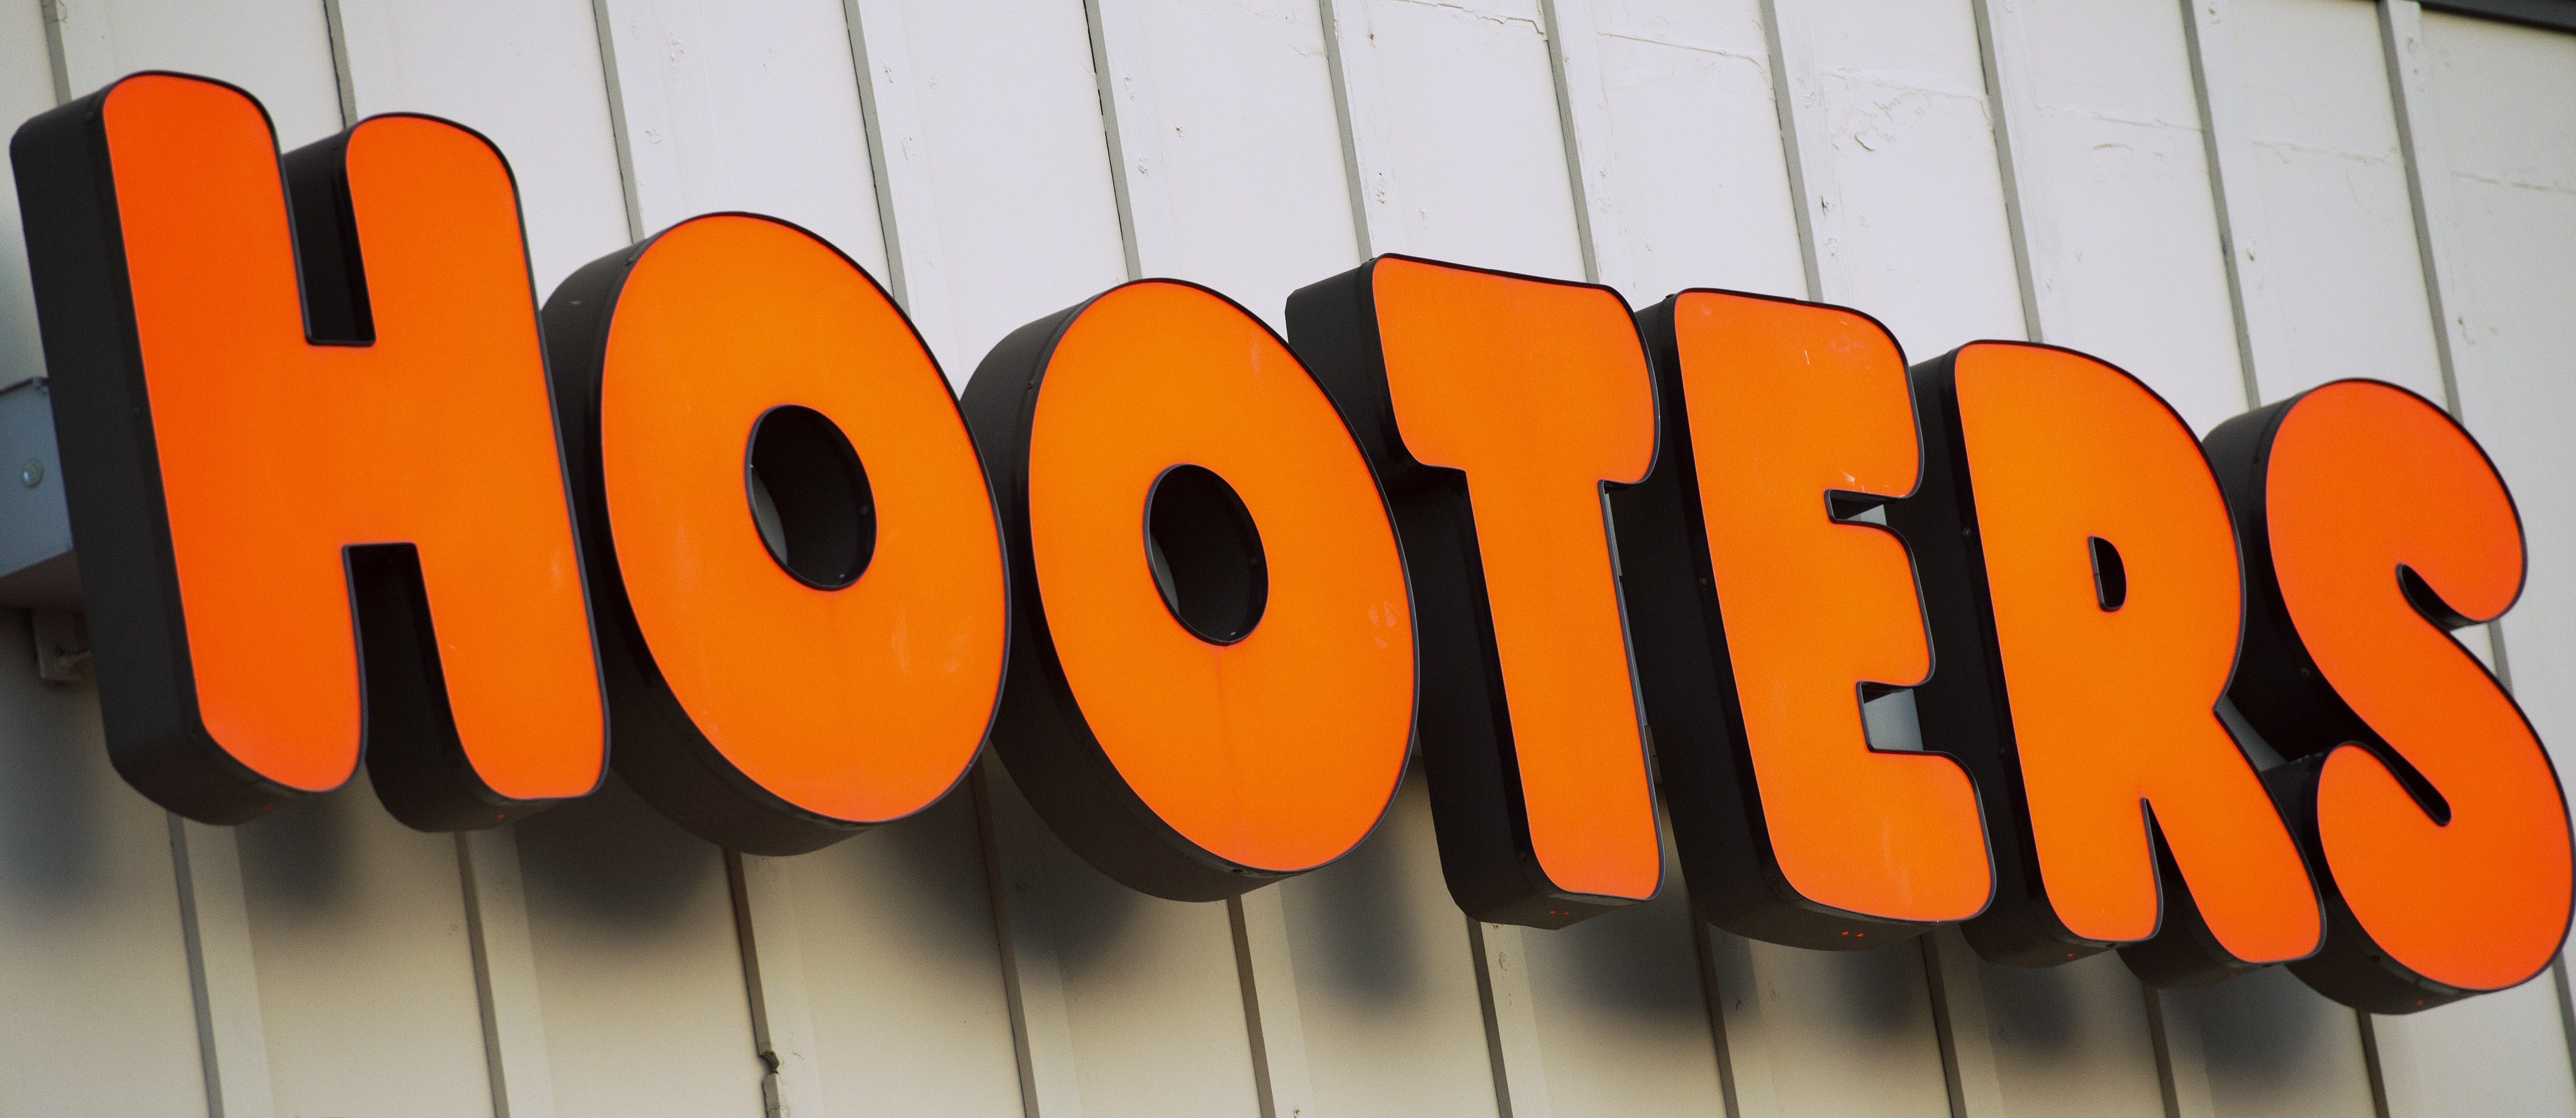 Hooters restaurant in Chantilly, Virginia on Jan. 2, 2015. (PAUL J. RICHARDS—AFP/Getty Images)